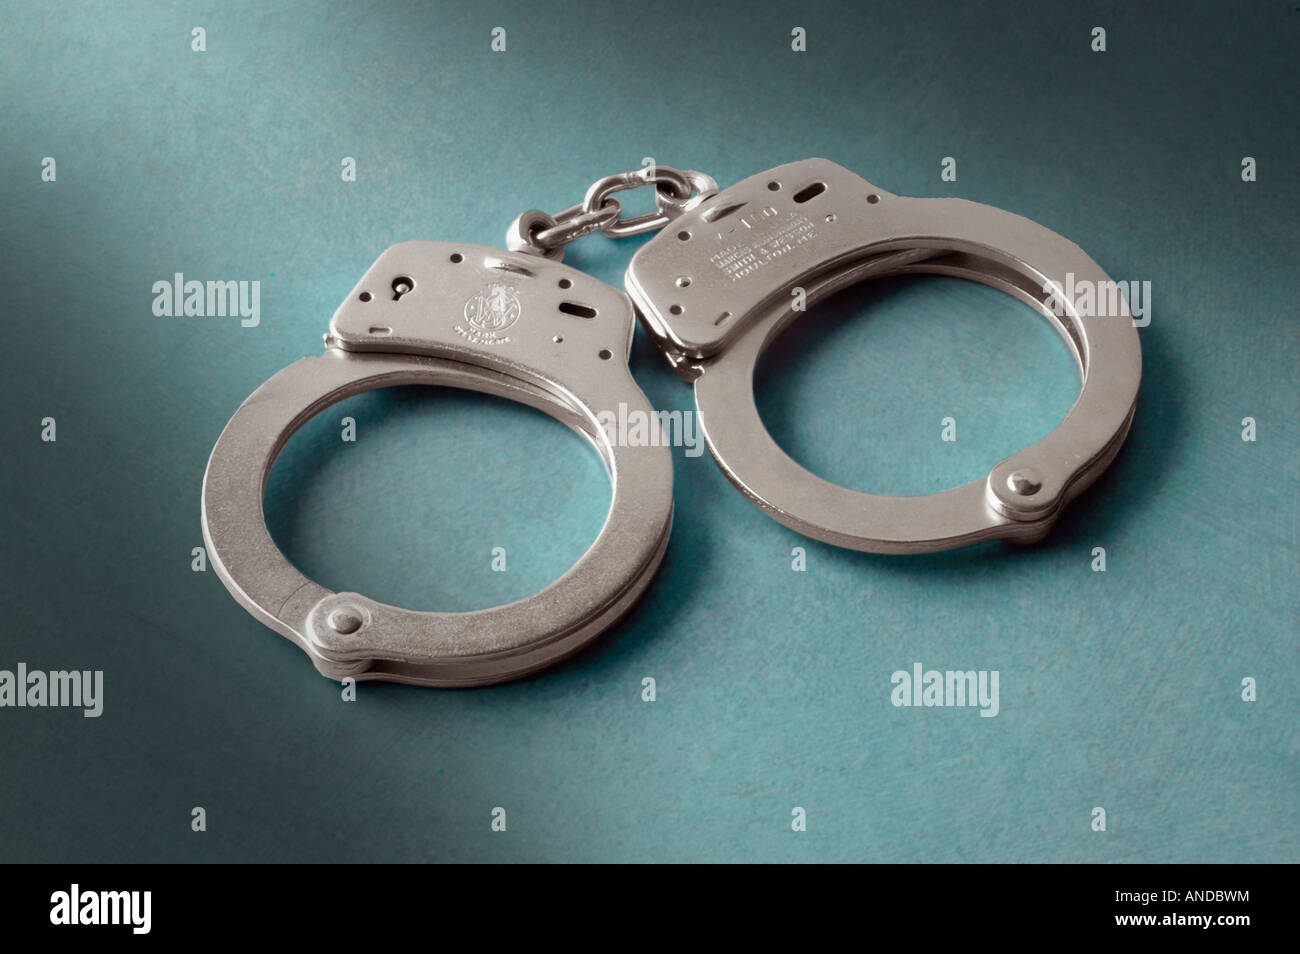 A pair of police handcuffs Stock Photo